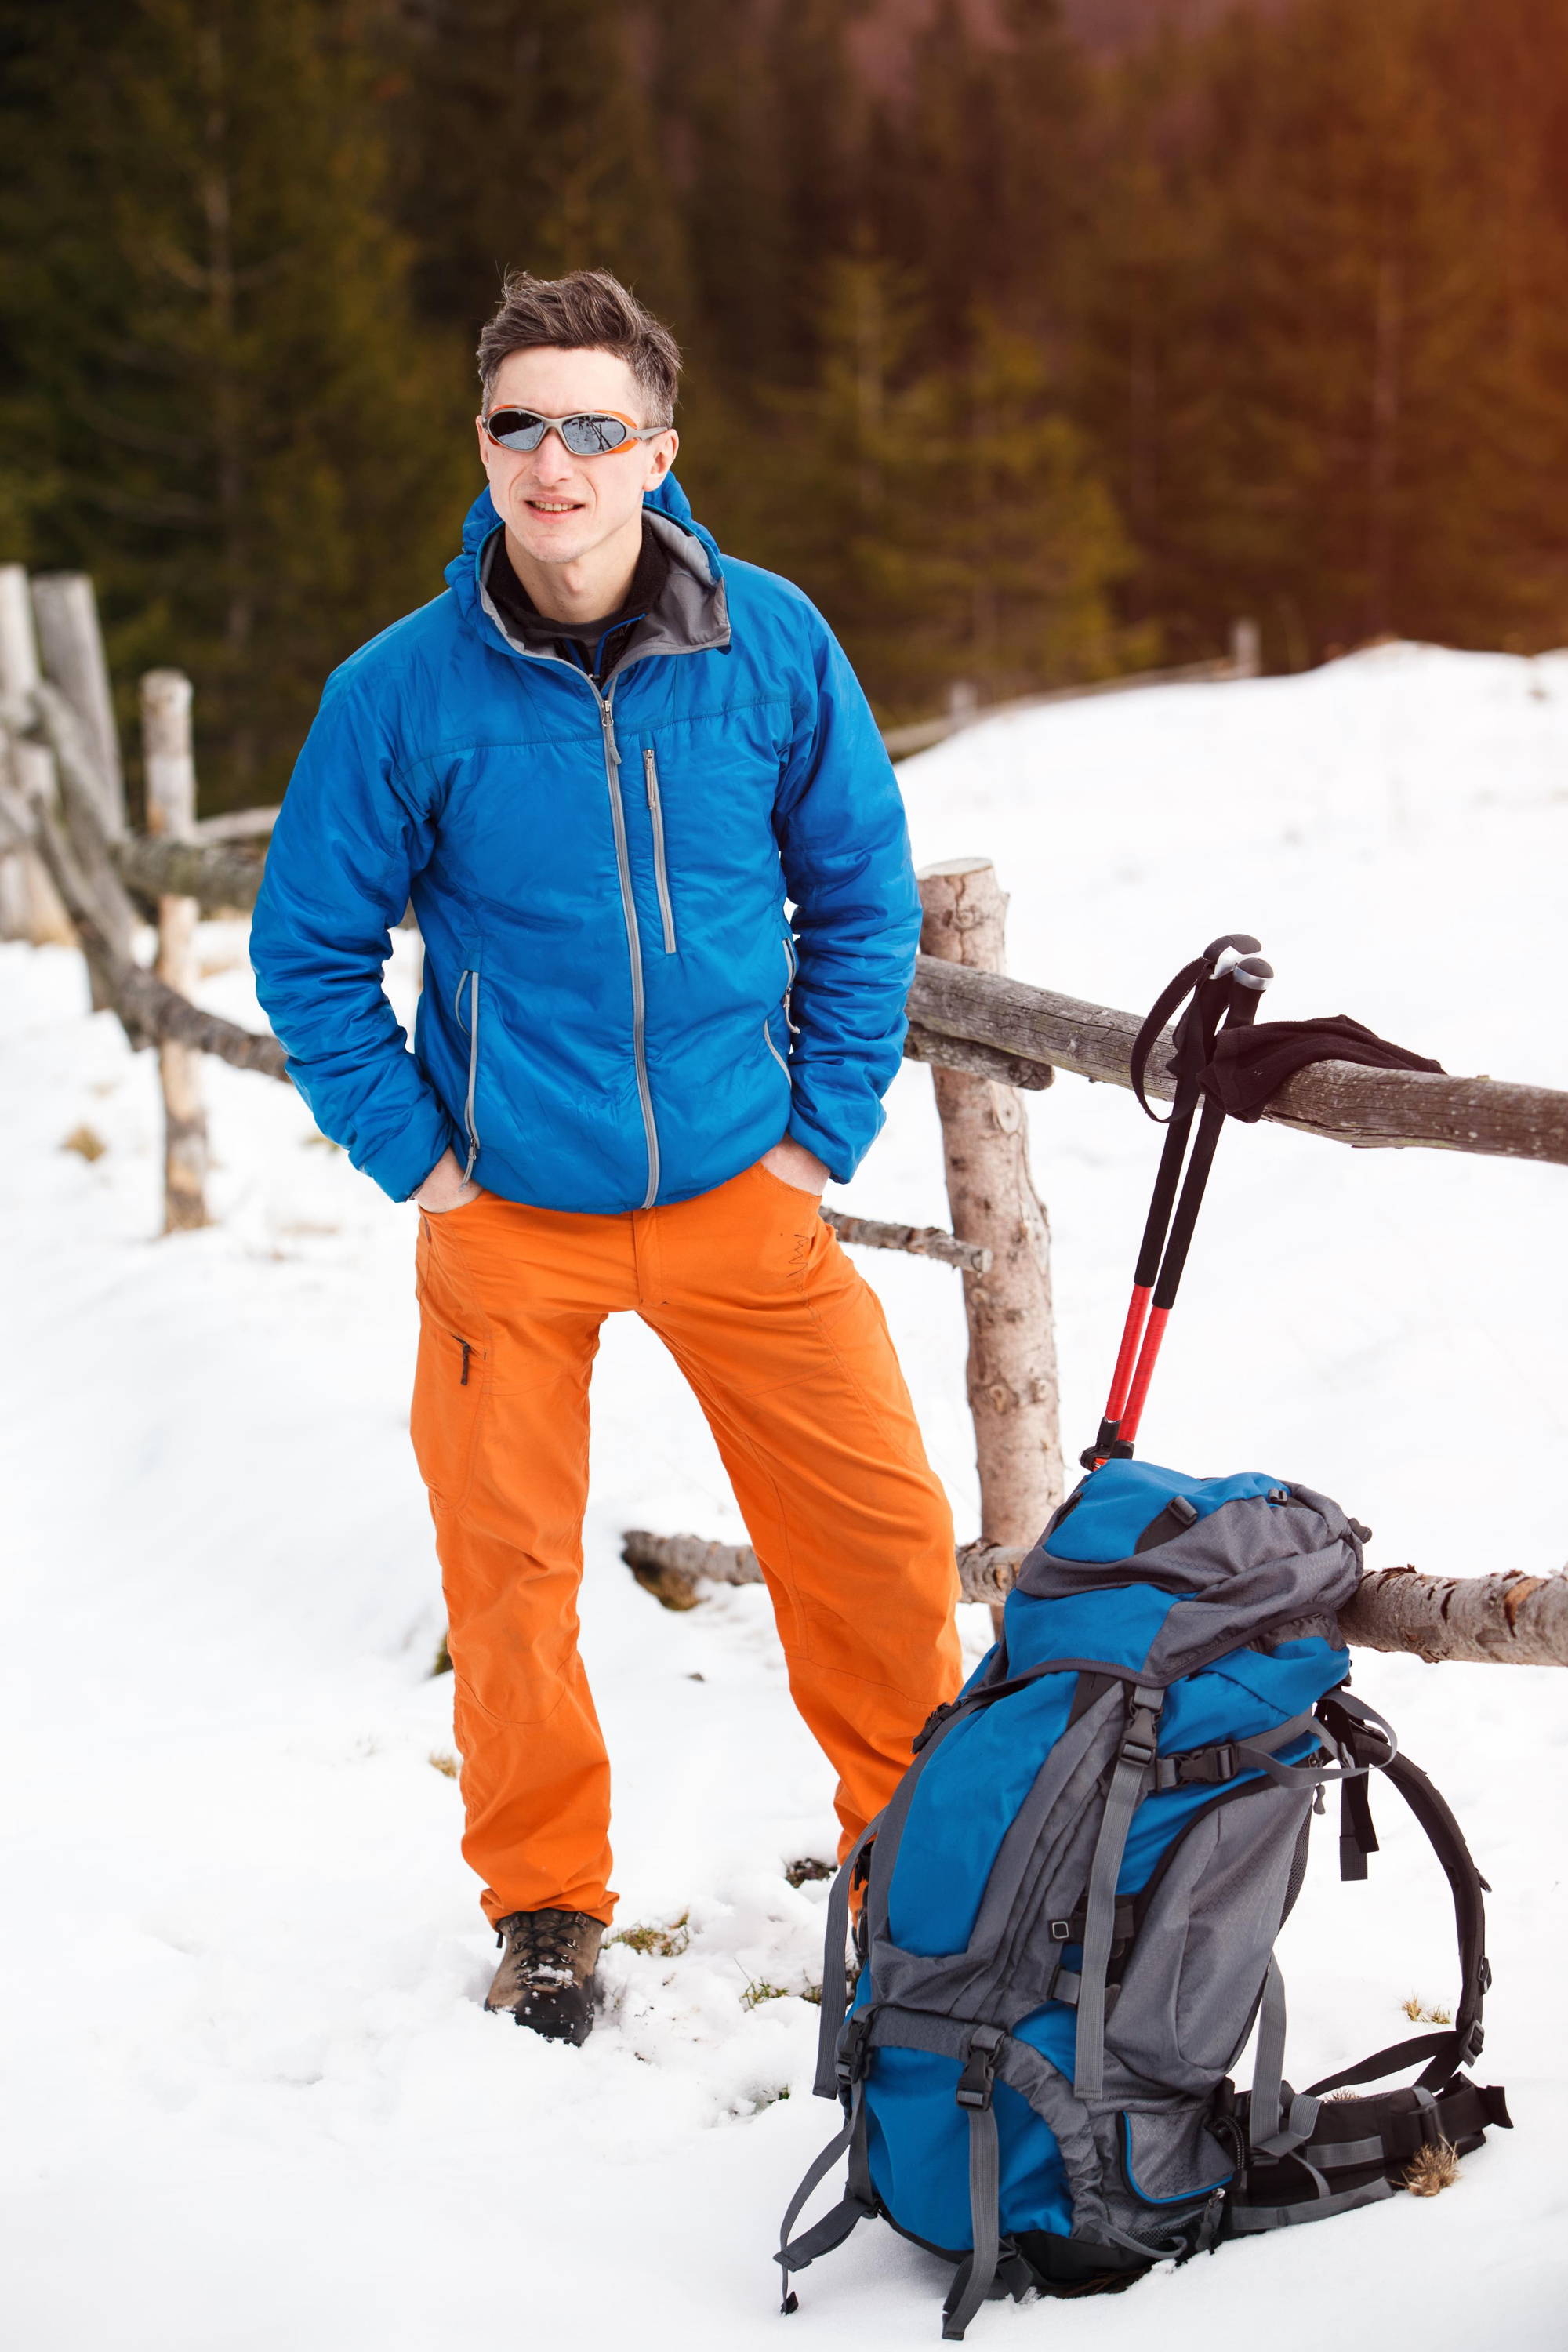 Man Hiking in Winter Conditions